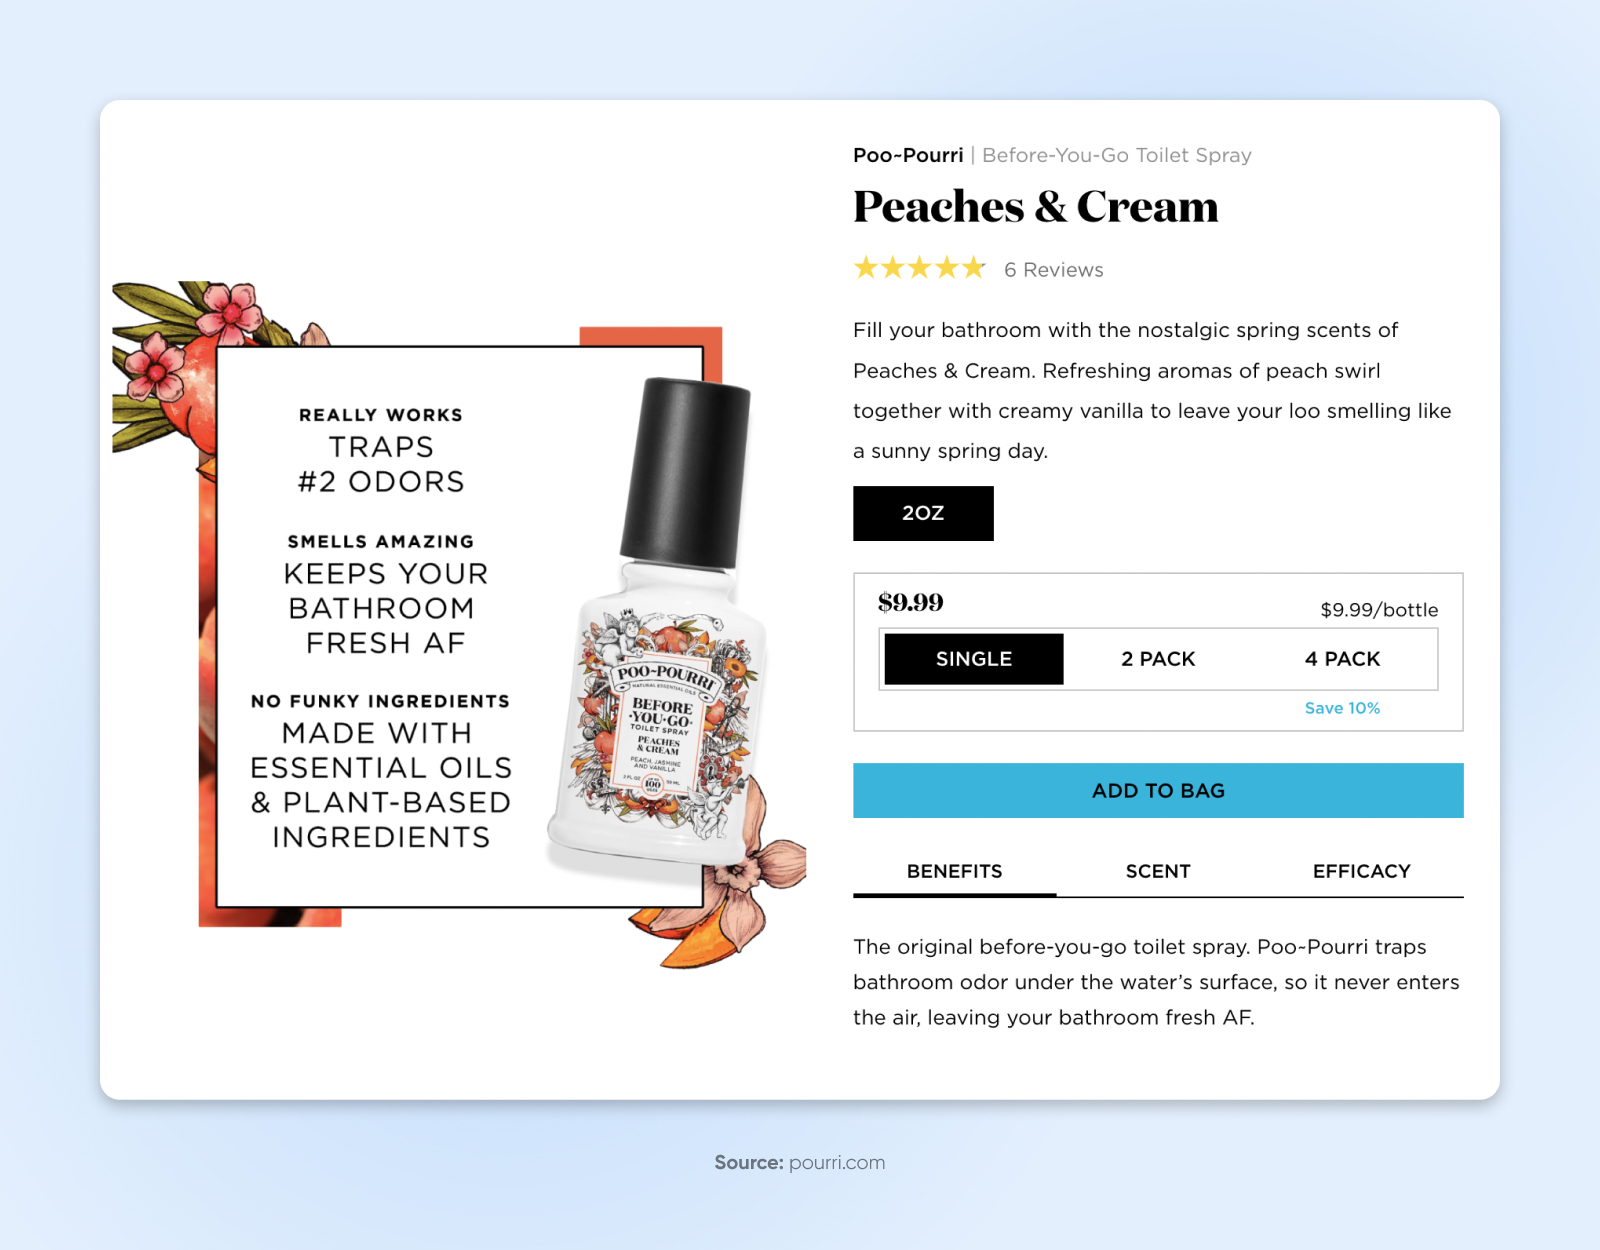 The Poo-Pourri Peaches & Cream product listing uses images and funny text to appeal to readers